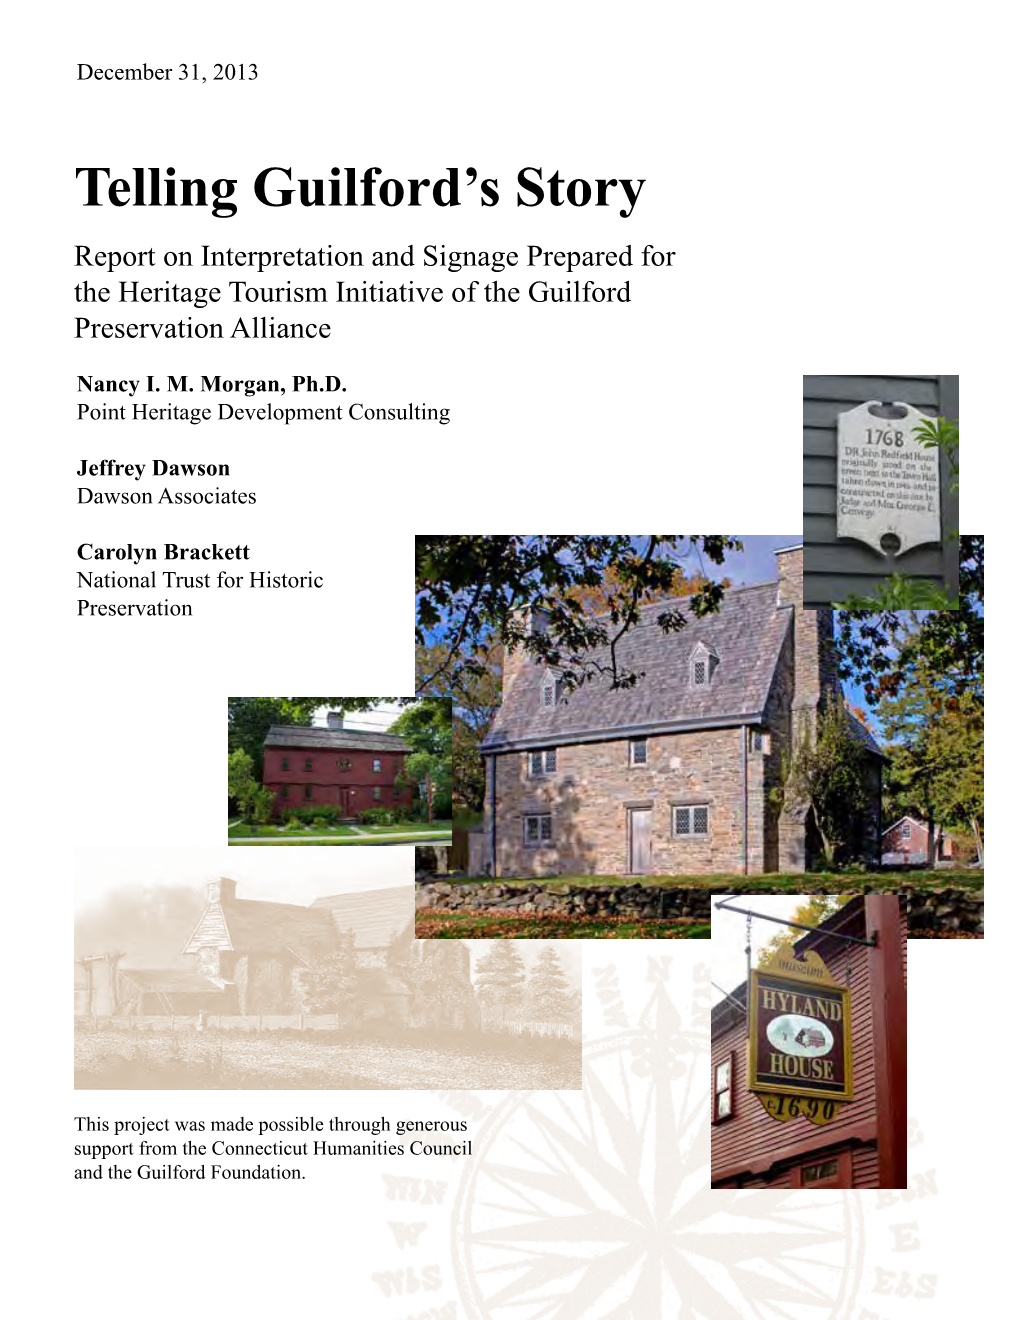 Telling Guilford's Story: Report on Interpretation and Signage